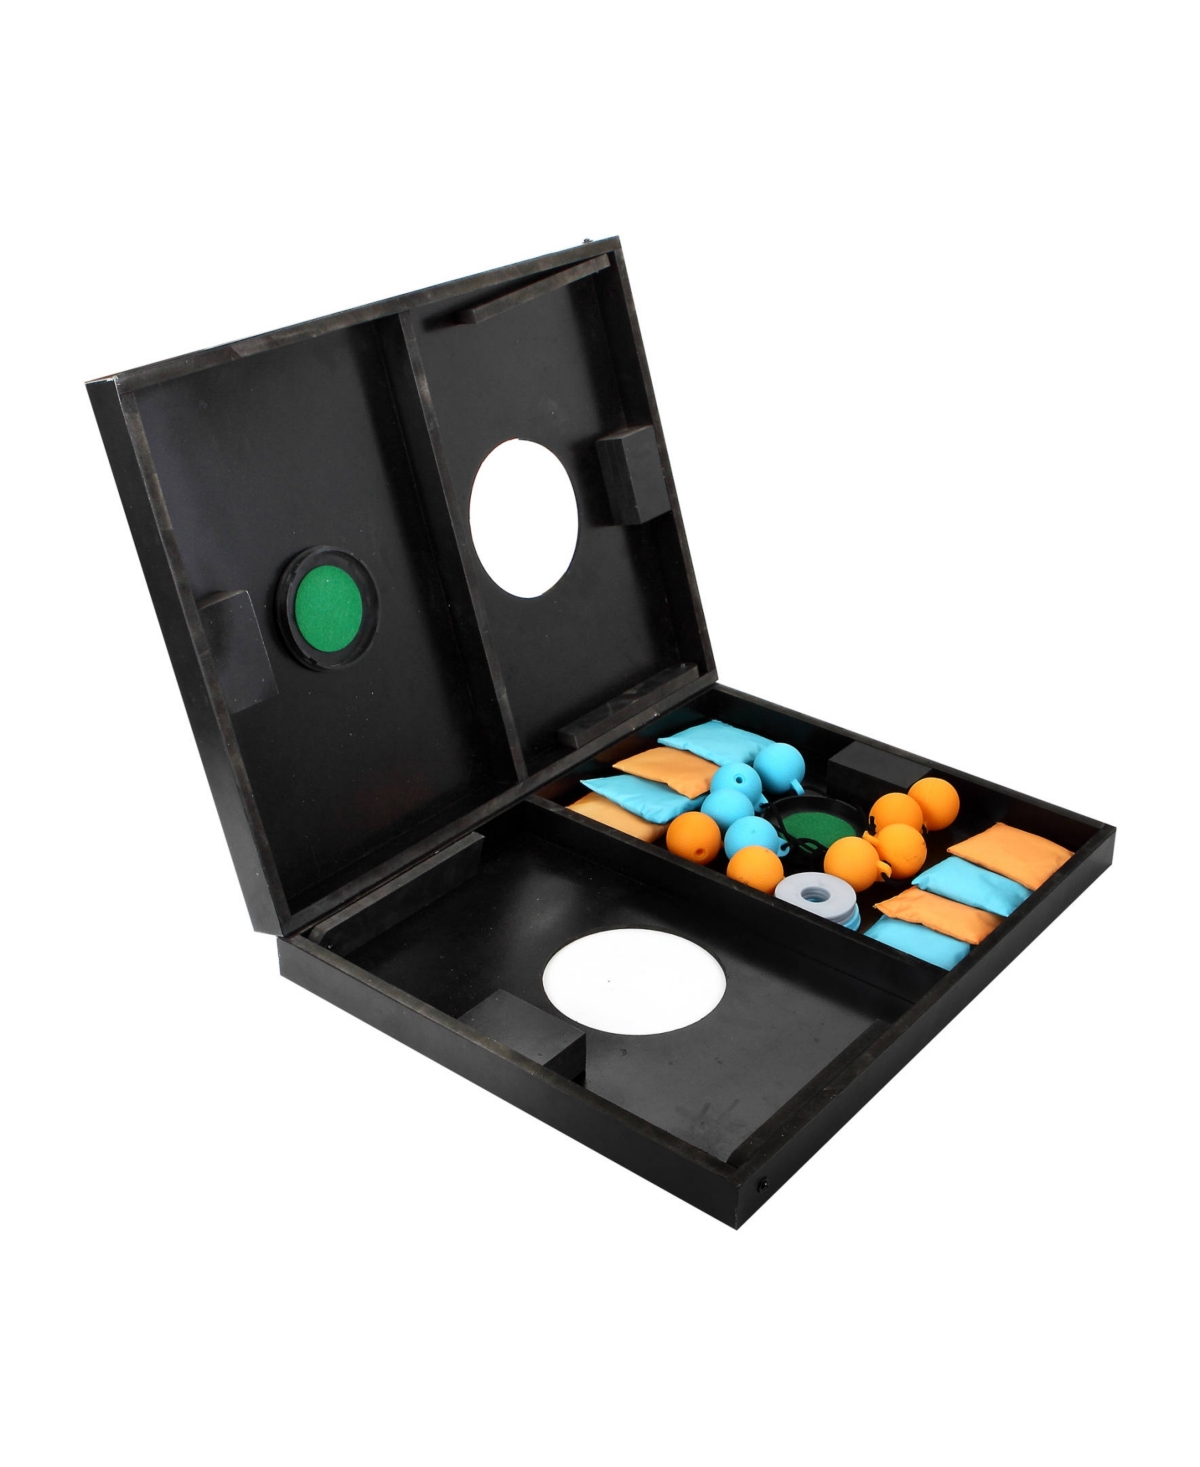 Shop Hathaway Triple Play 3 In 1 Toss Game In Orange